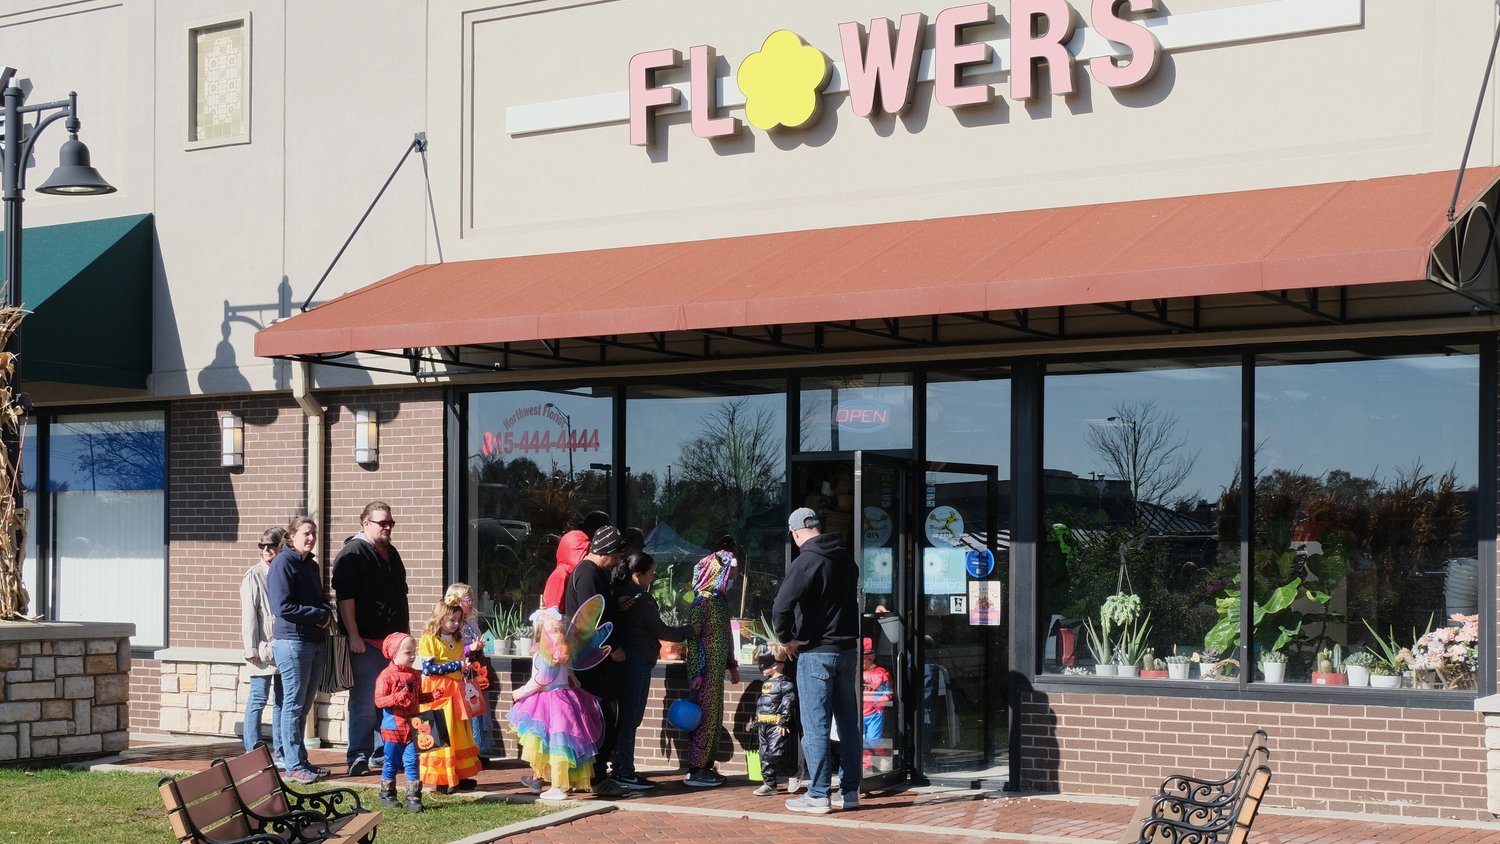 Trick-or-treating at the Northwest Florist.